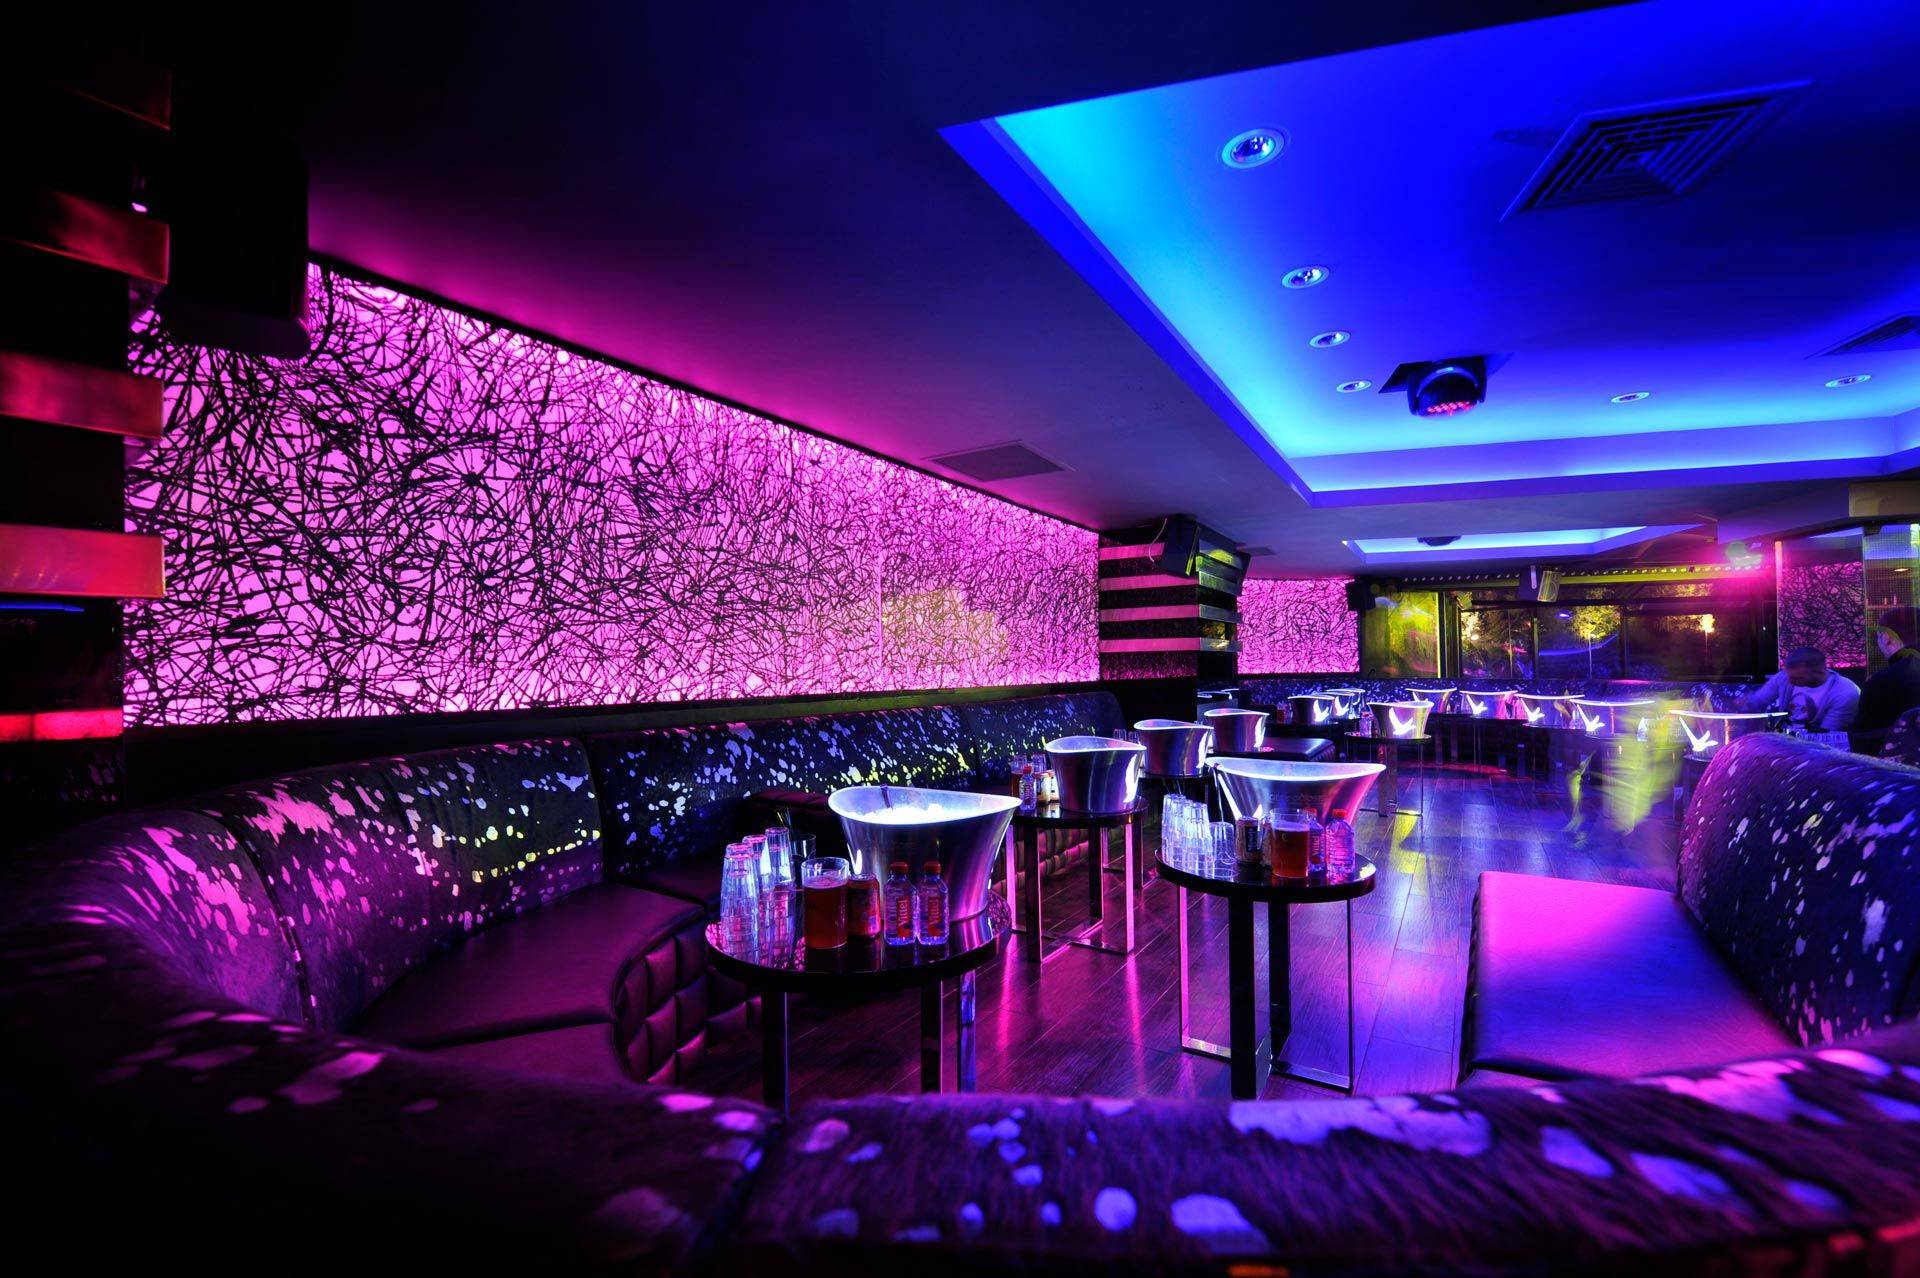 Vibrant nightclub interior with purple and blue lighting, featuring abstract wall patterns, modern curved seating, and illuminated tables set with bottles and ice buckets.